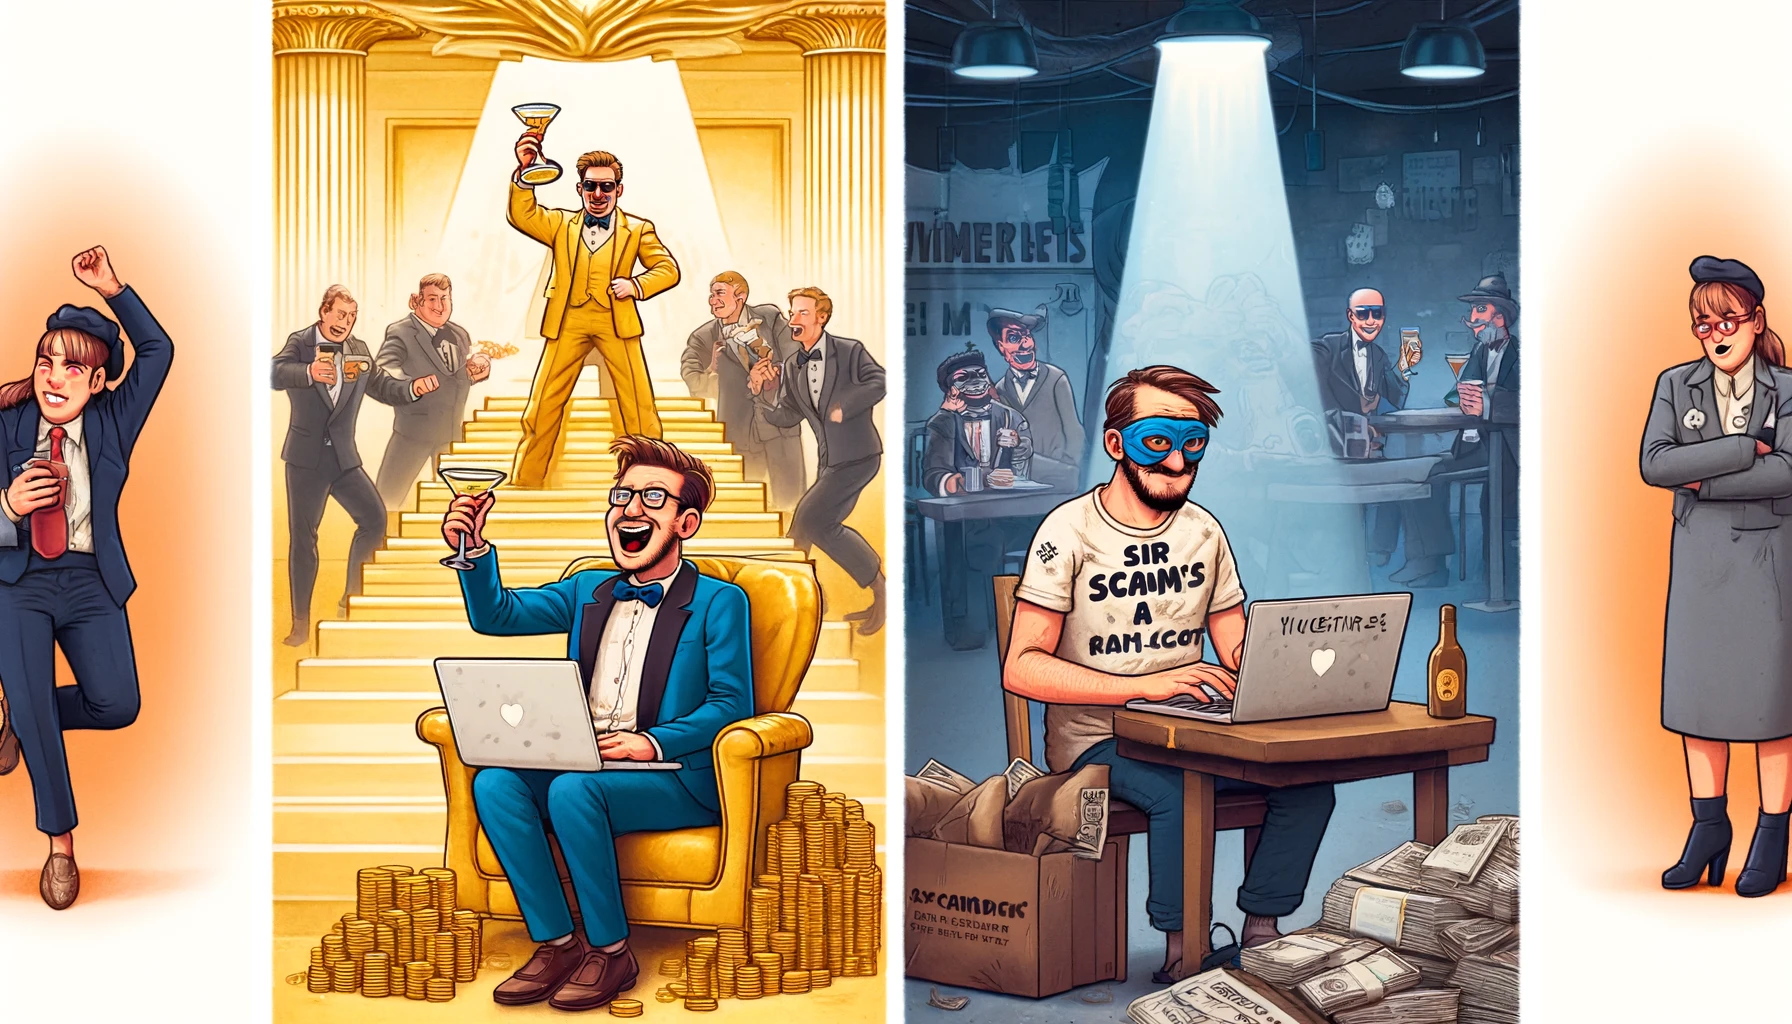 two cartoons depicting the contrast between scammers and scam fighters, as described in the satire. The first shows the lavish lifestyle of the scammers, and the second captures the humble setting of a scam fighter.